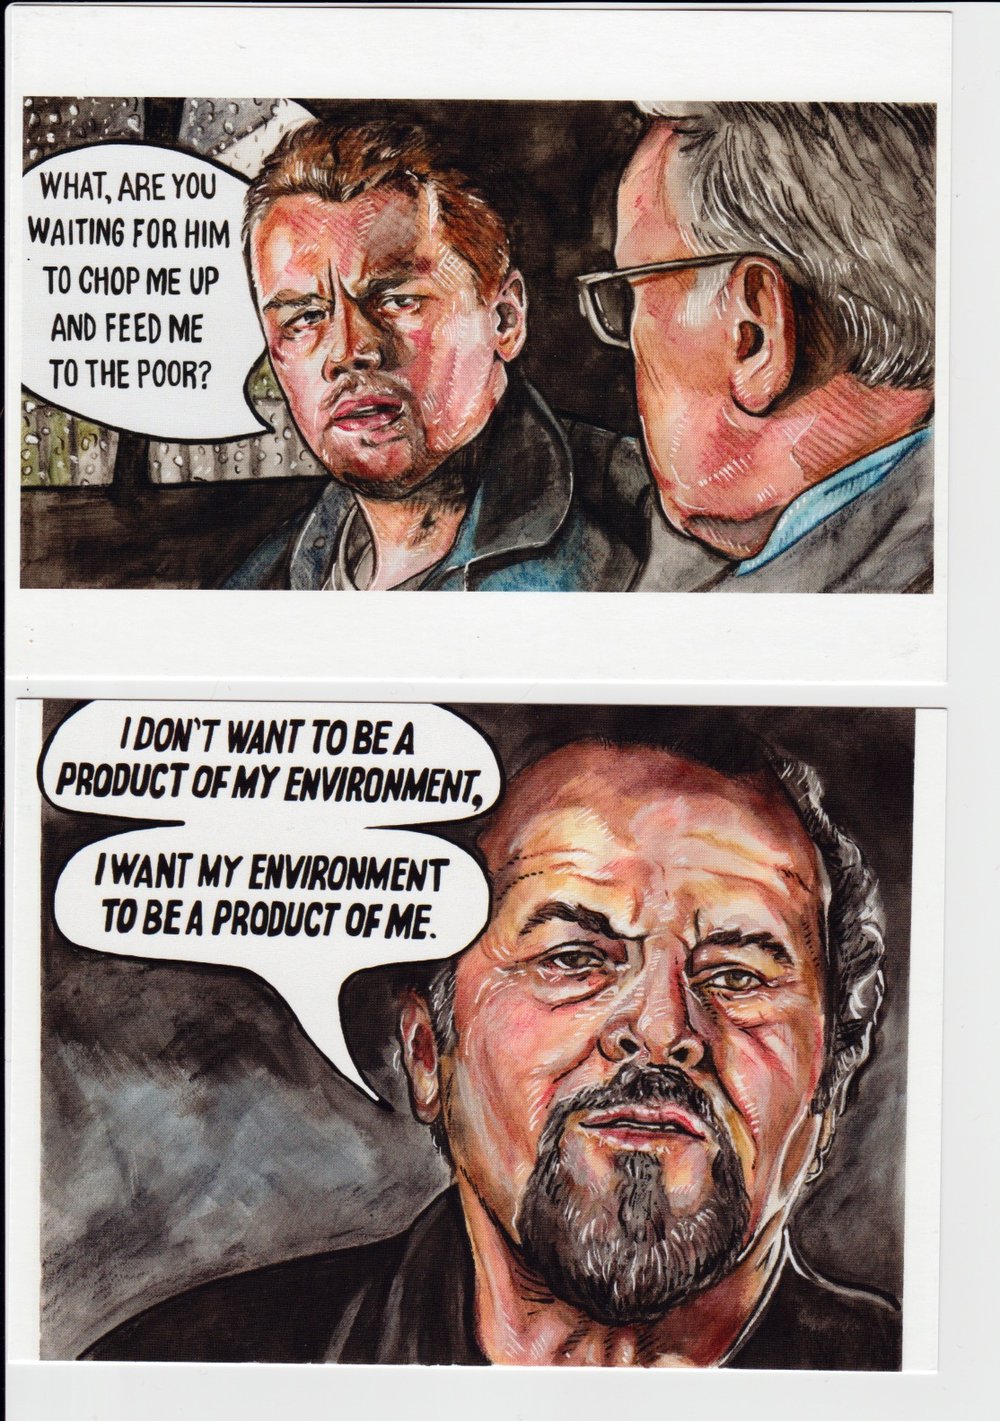 The Departed Art Cards - Set of 5